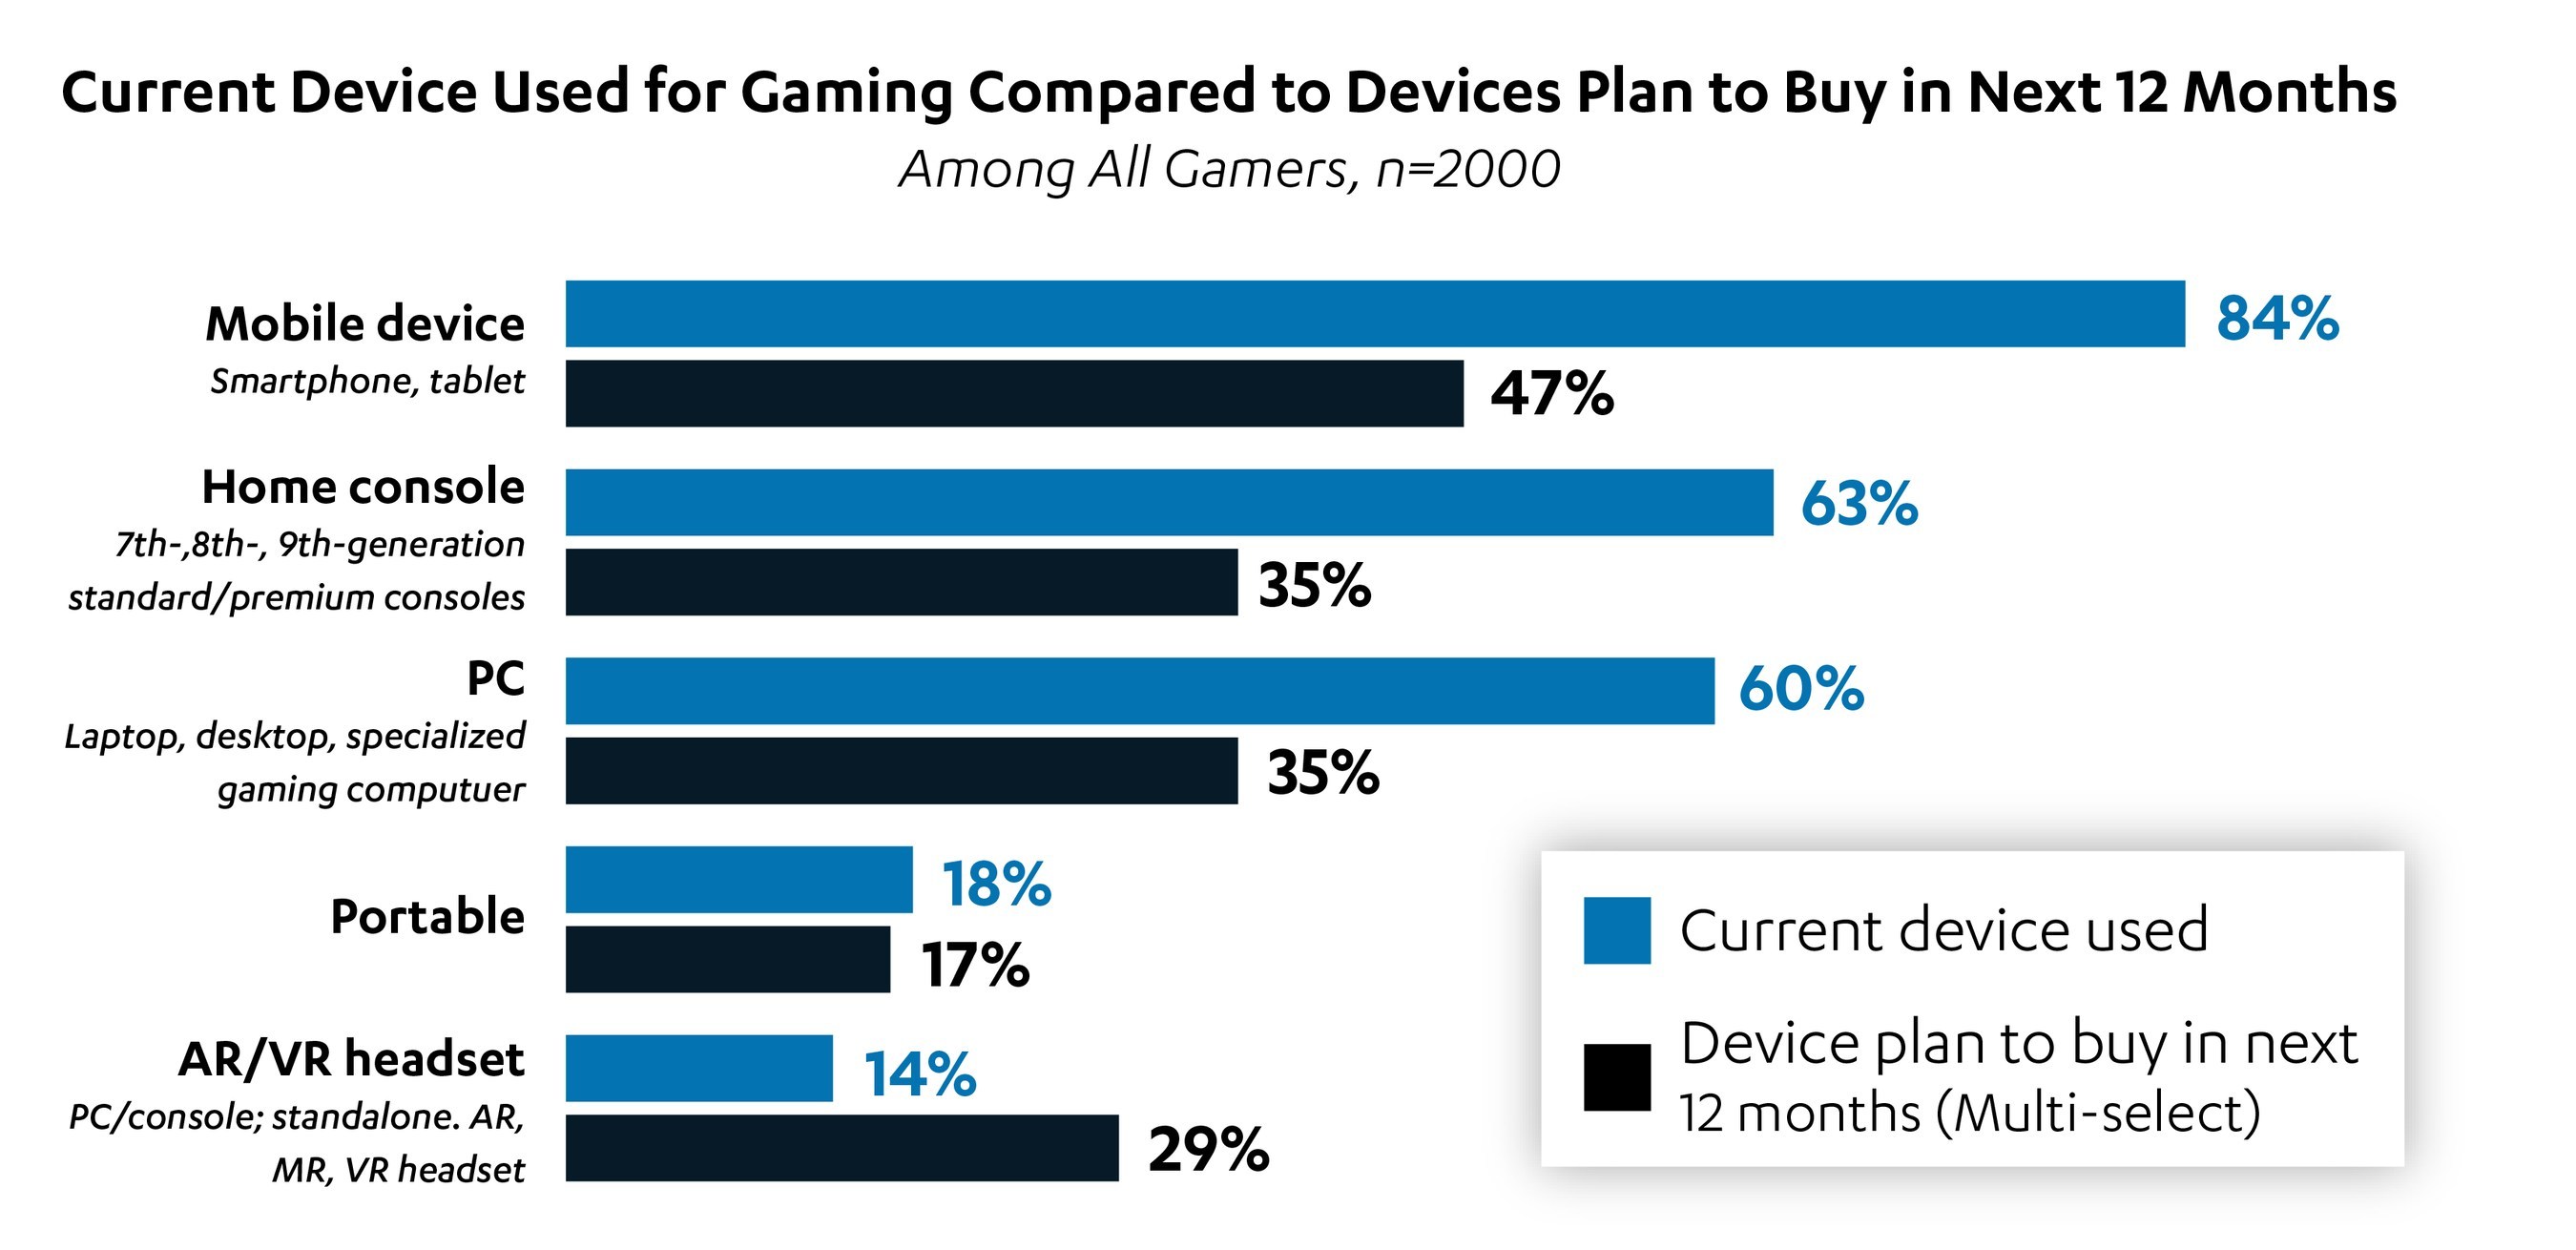 Chart of devices used by U.S. gamers compared to device purchase intent in next 12 months.